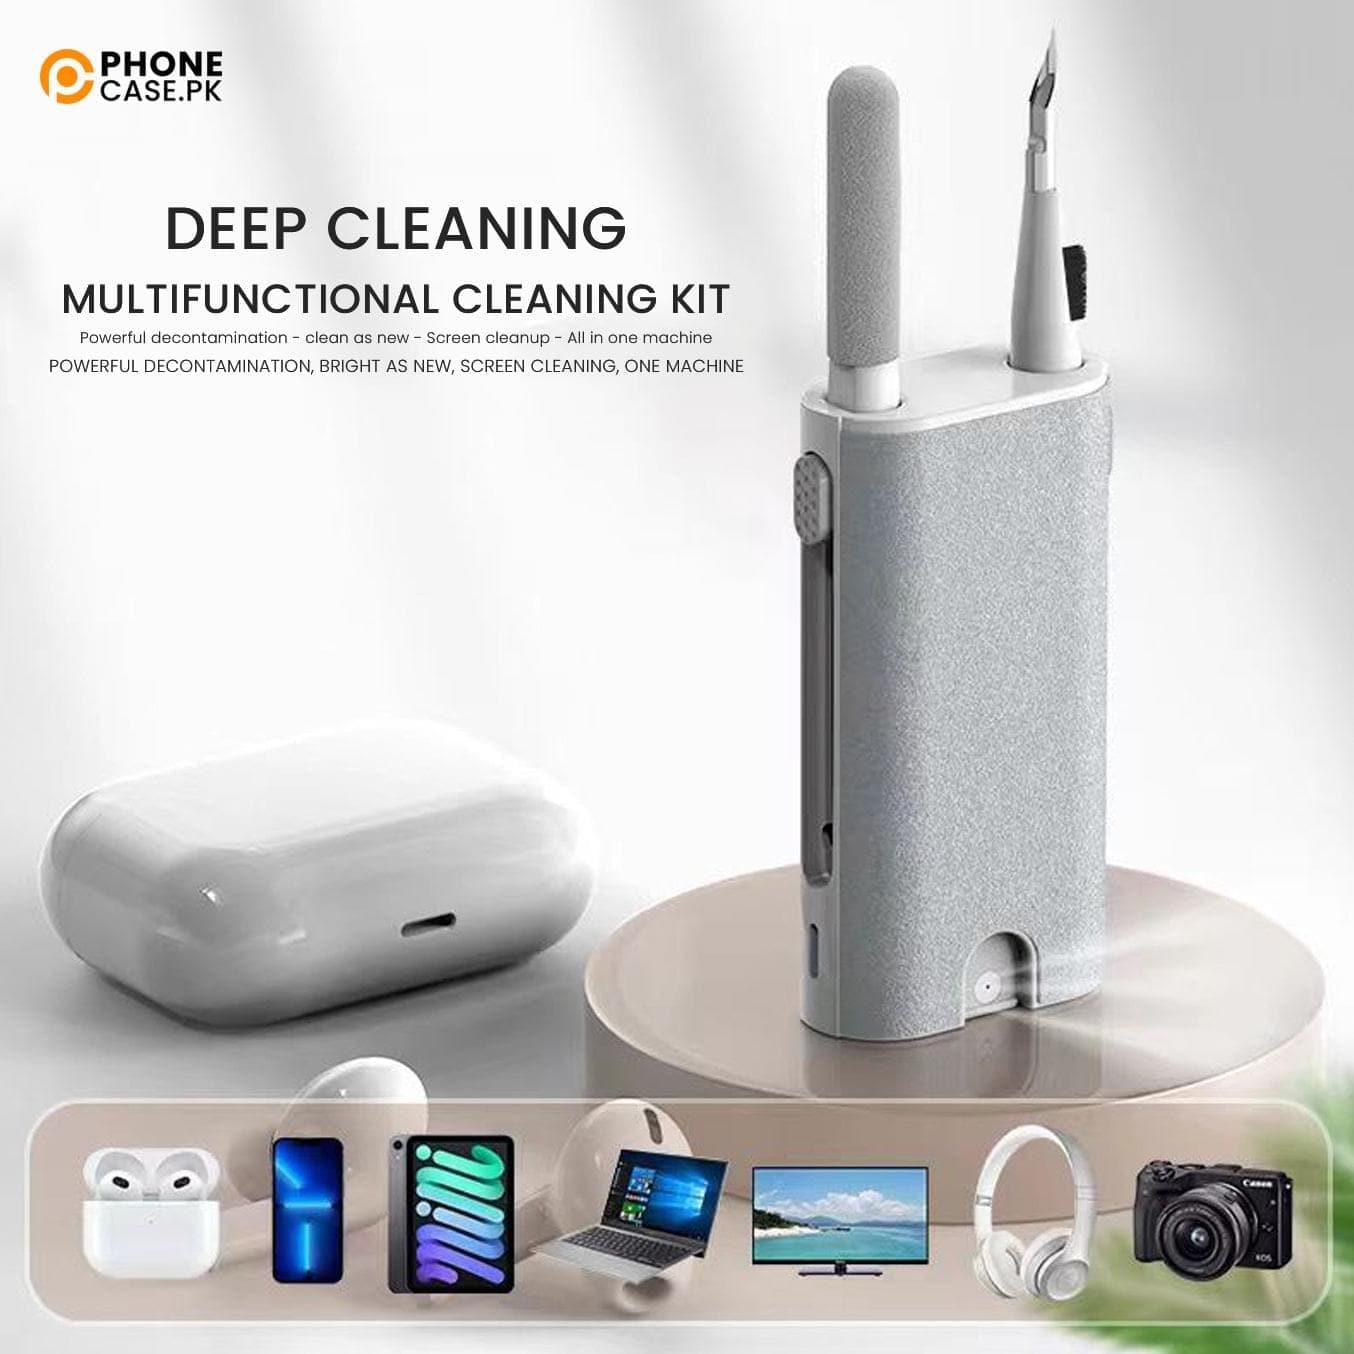 5 in 1 Multi functional Microfiber Spray + Cleaning Pen kit for All Devices